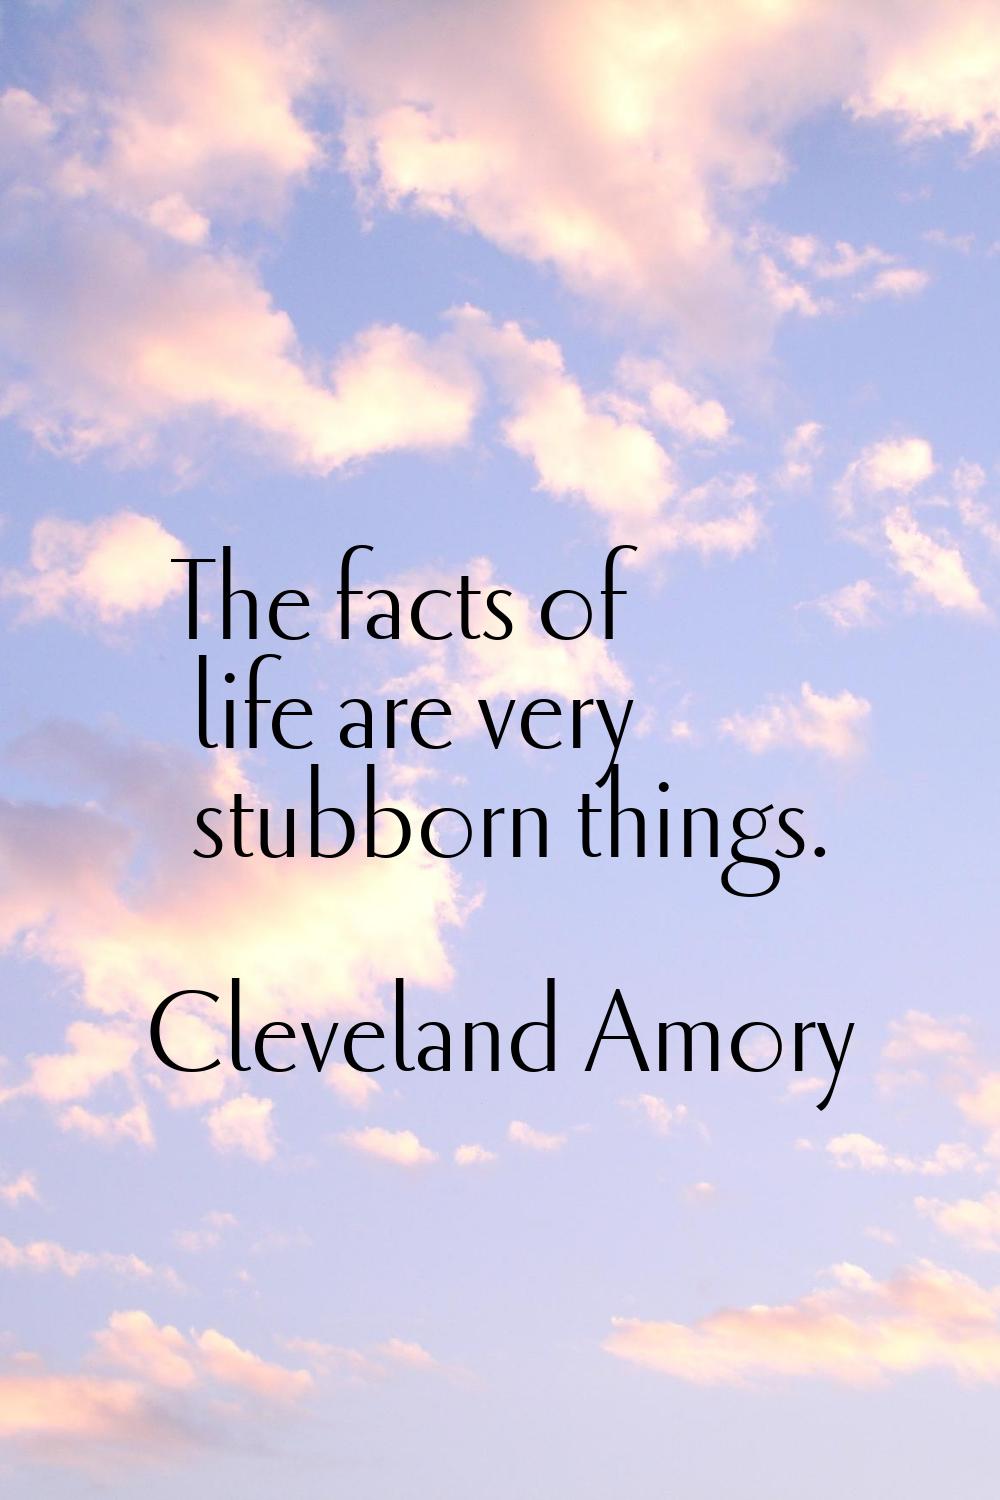 The facts of life are very stubborn things.